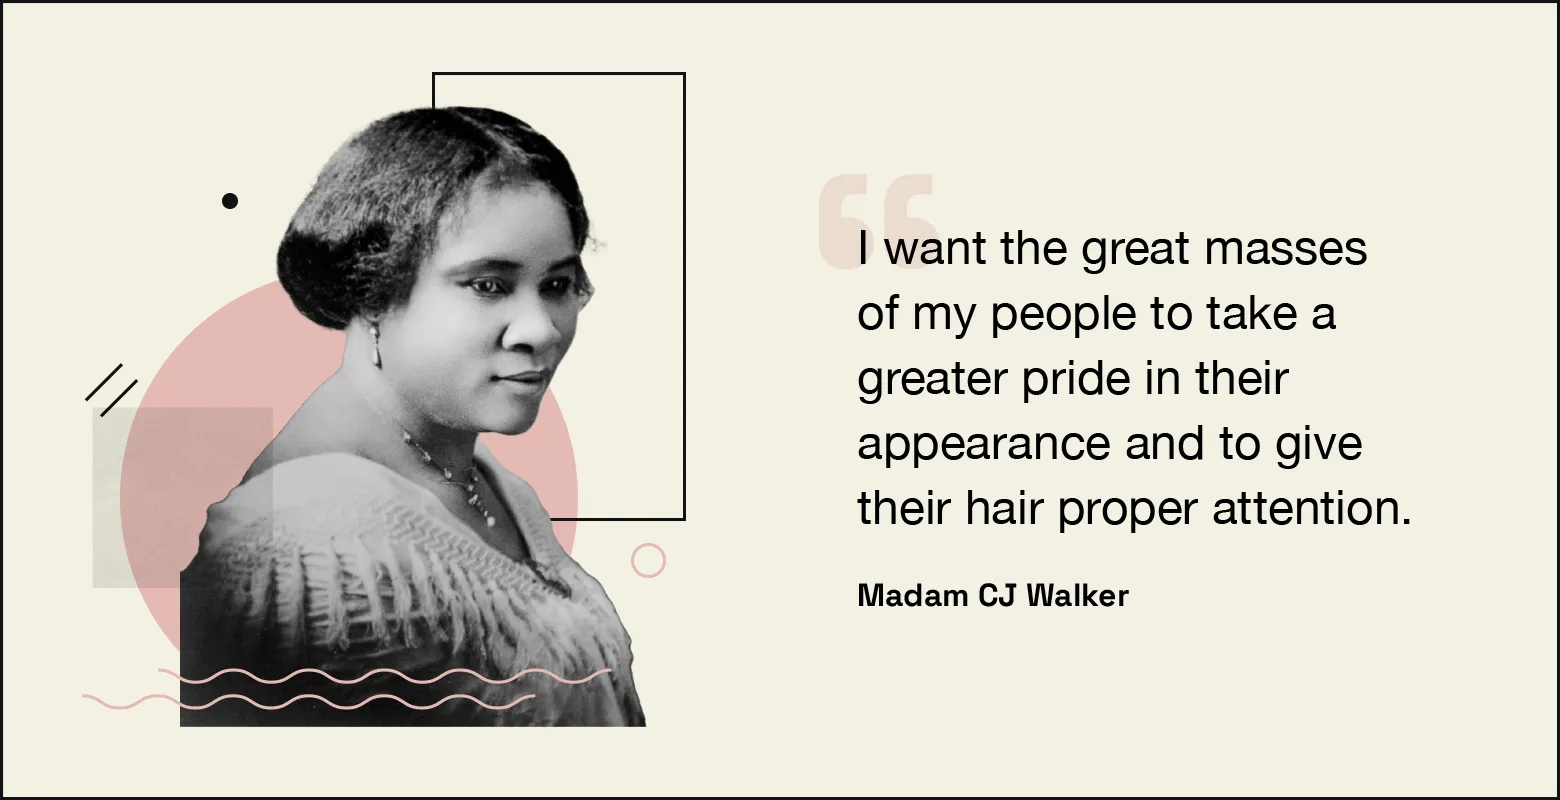 “I want the great masses of my people to take a greater pride in their appearance and to give their hair proper attention.” — Madam C.J. Walker.